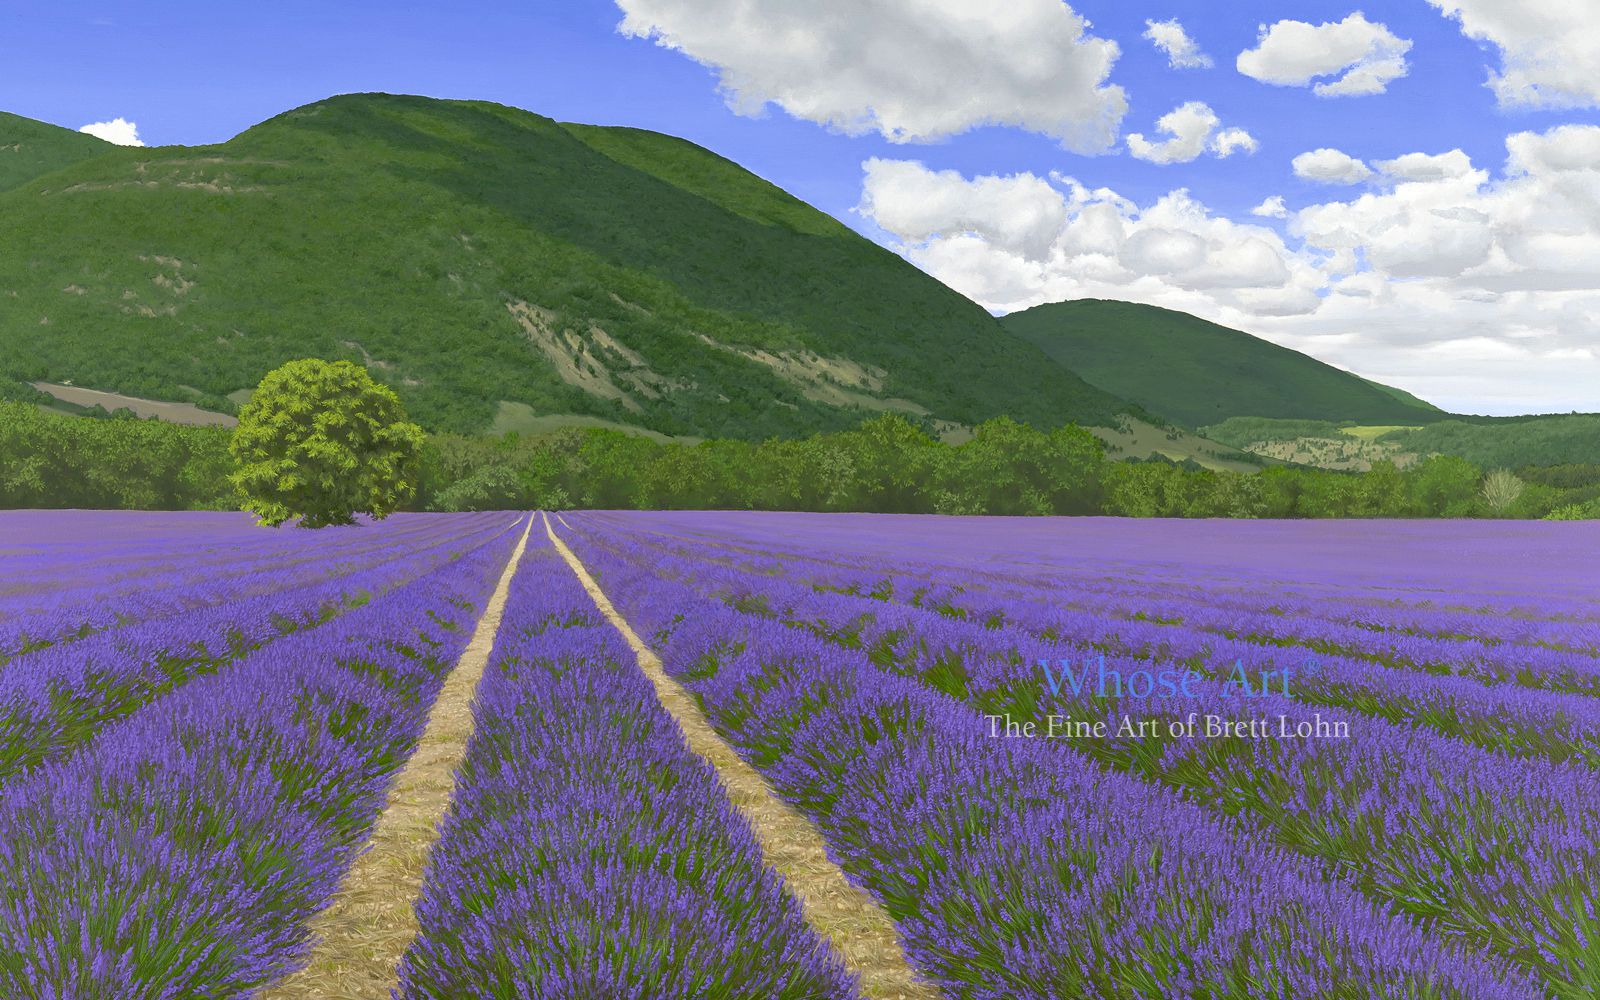 Lavender fields painting in oil on canvas showing rows of lavender in a field. The weather is warm and the breeze still